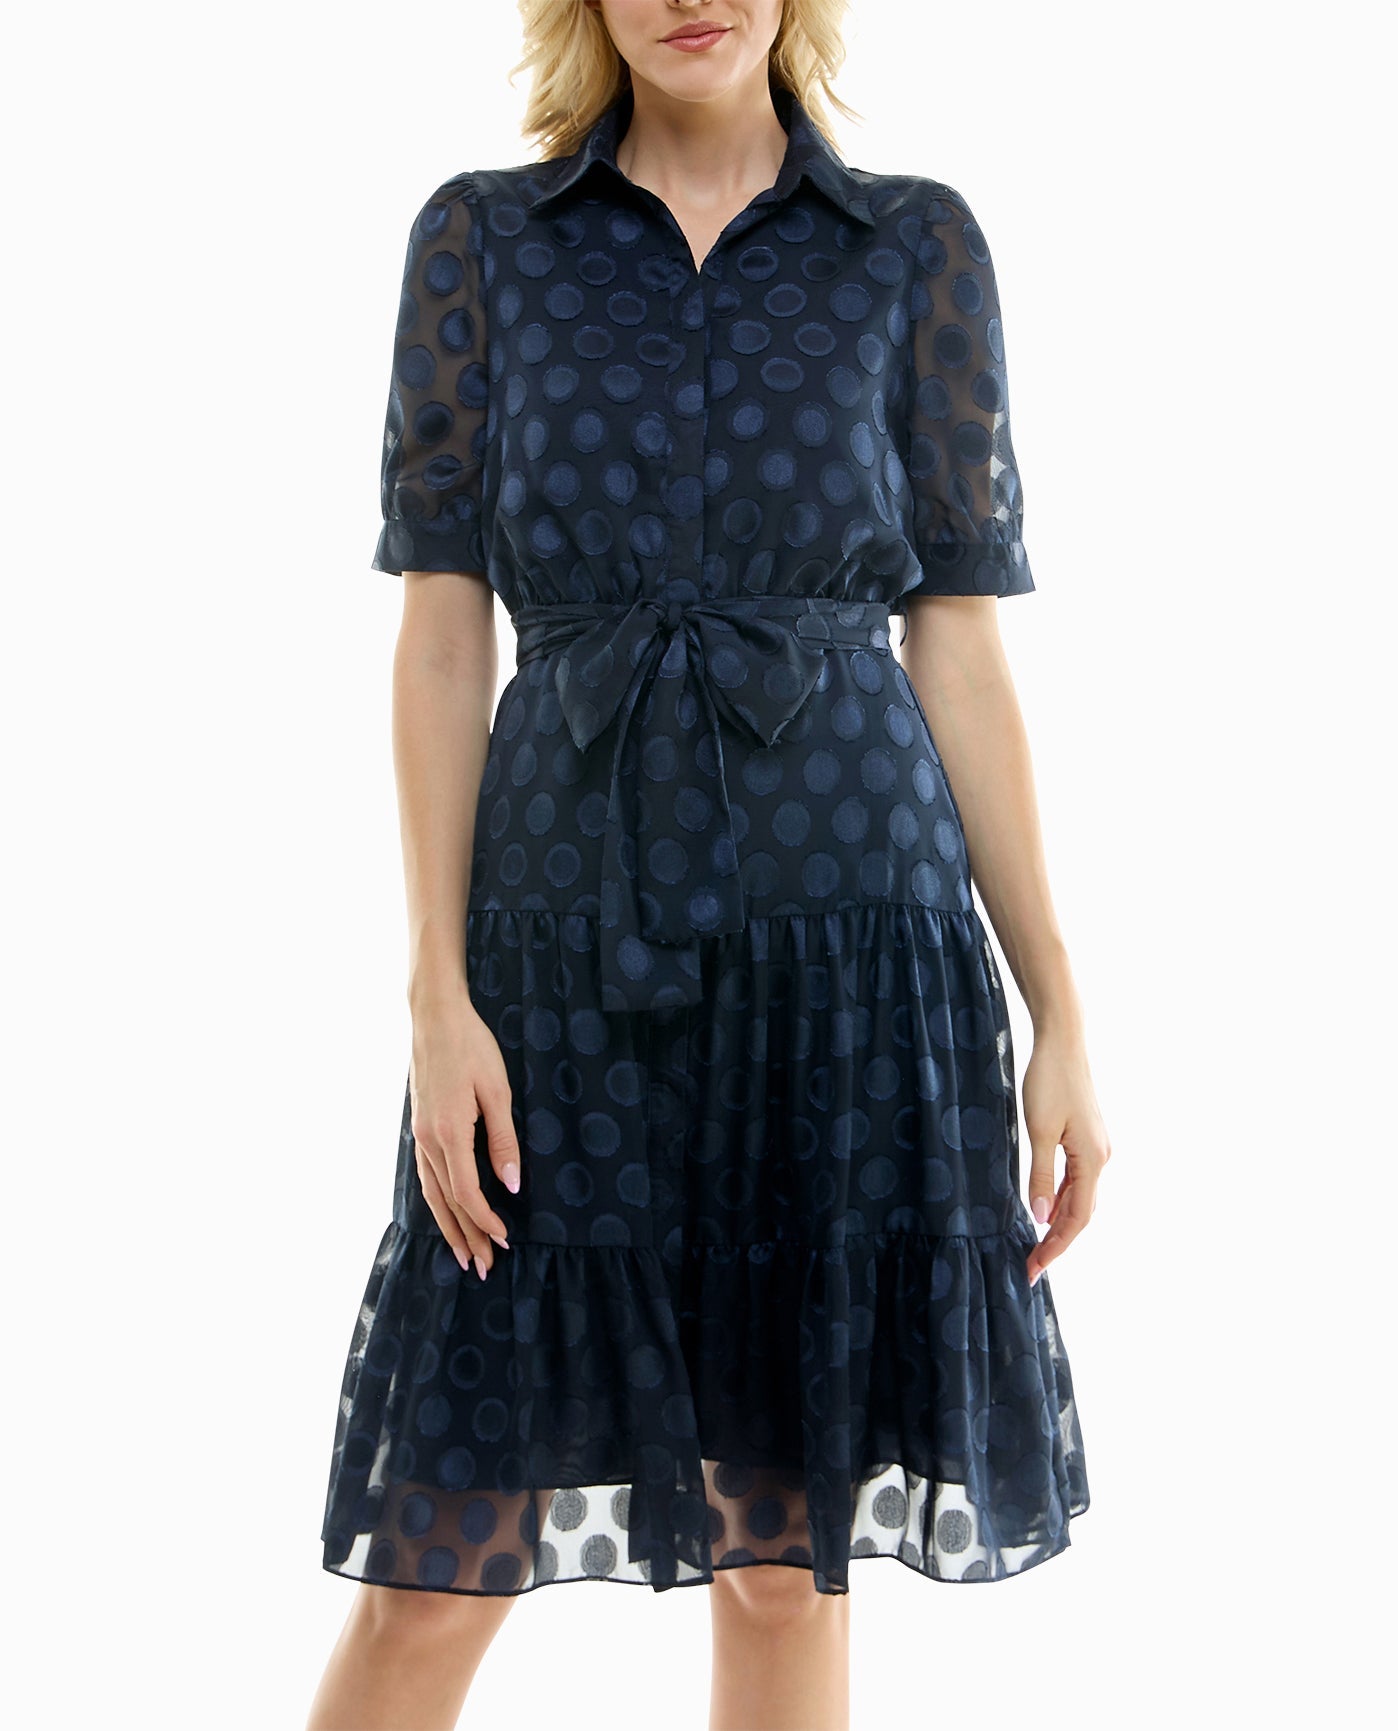 ZOOMED IN FRONT OF ARIA JACQUARD CHIFFON SHIRT DRESS | Navy